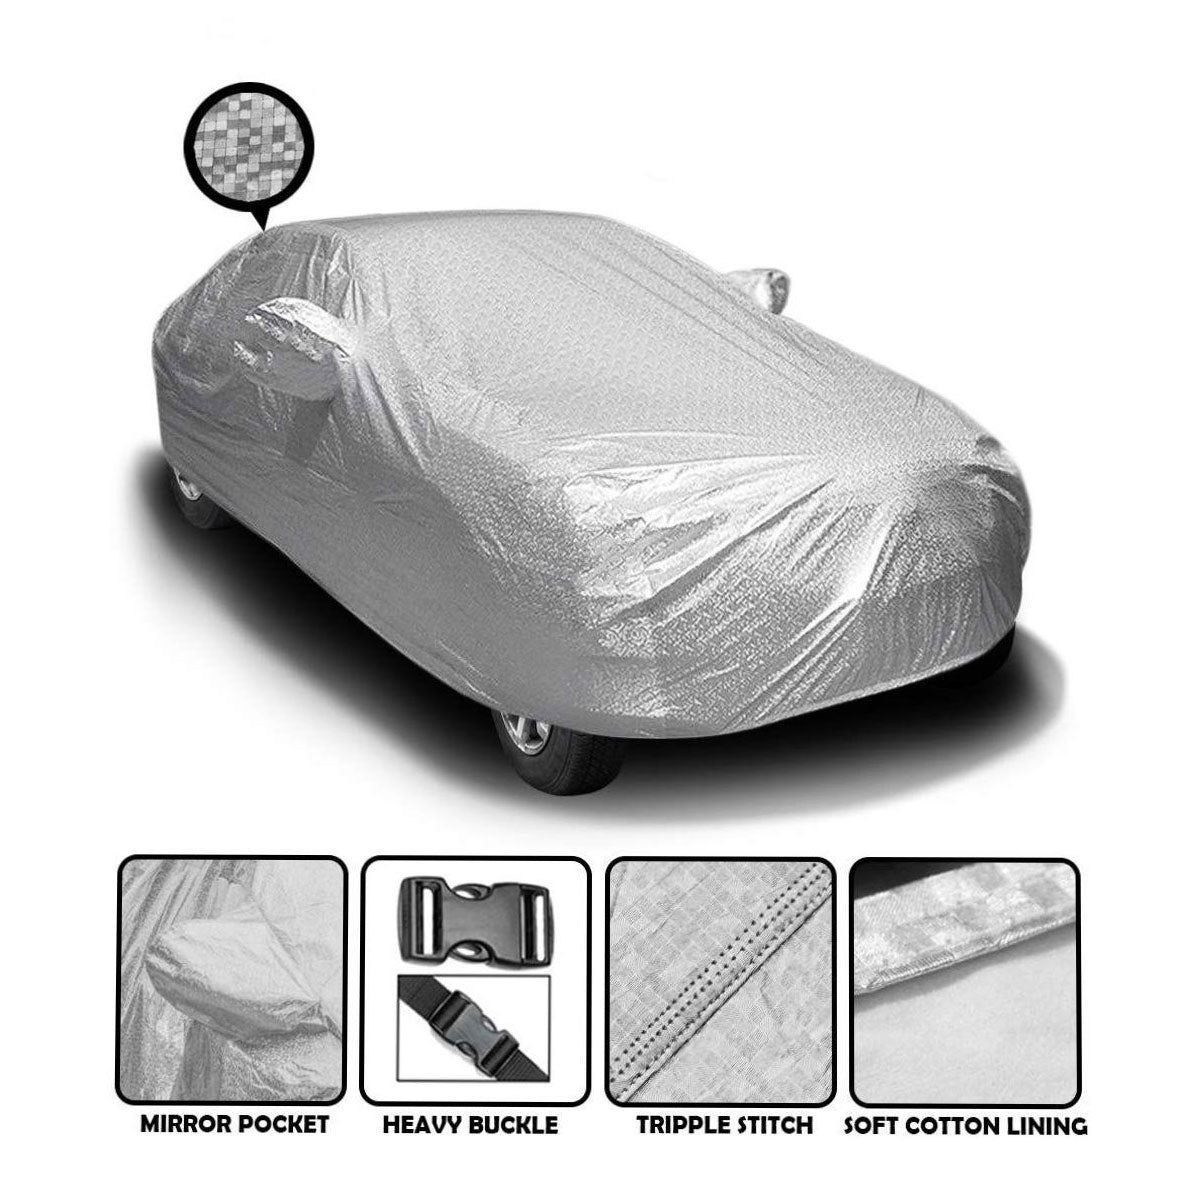 Oshotto Spyro Silver Anti Reflective, dustproof and Water Proof Car Body Cover with Mirror Pockets For Mercedes Benz GLE